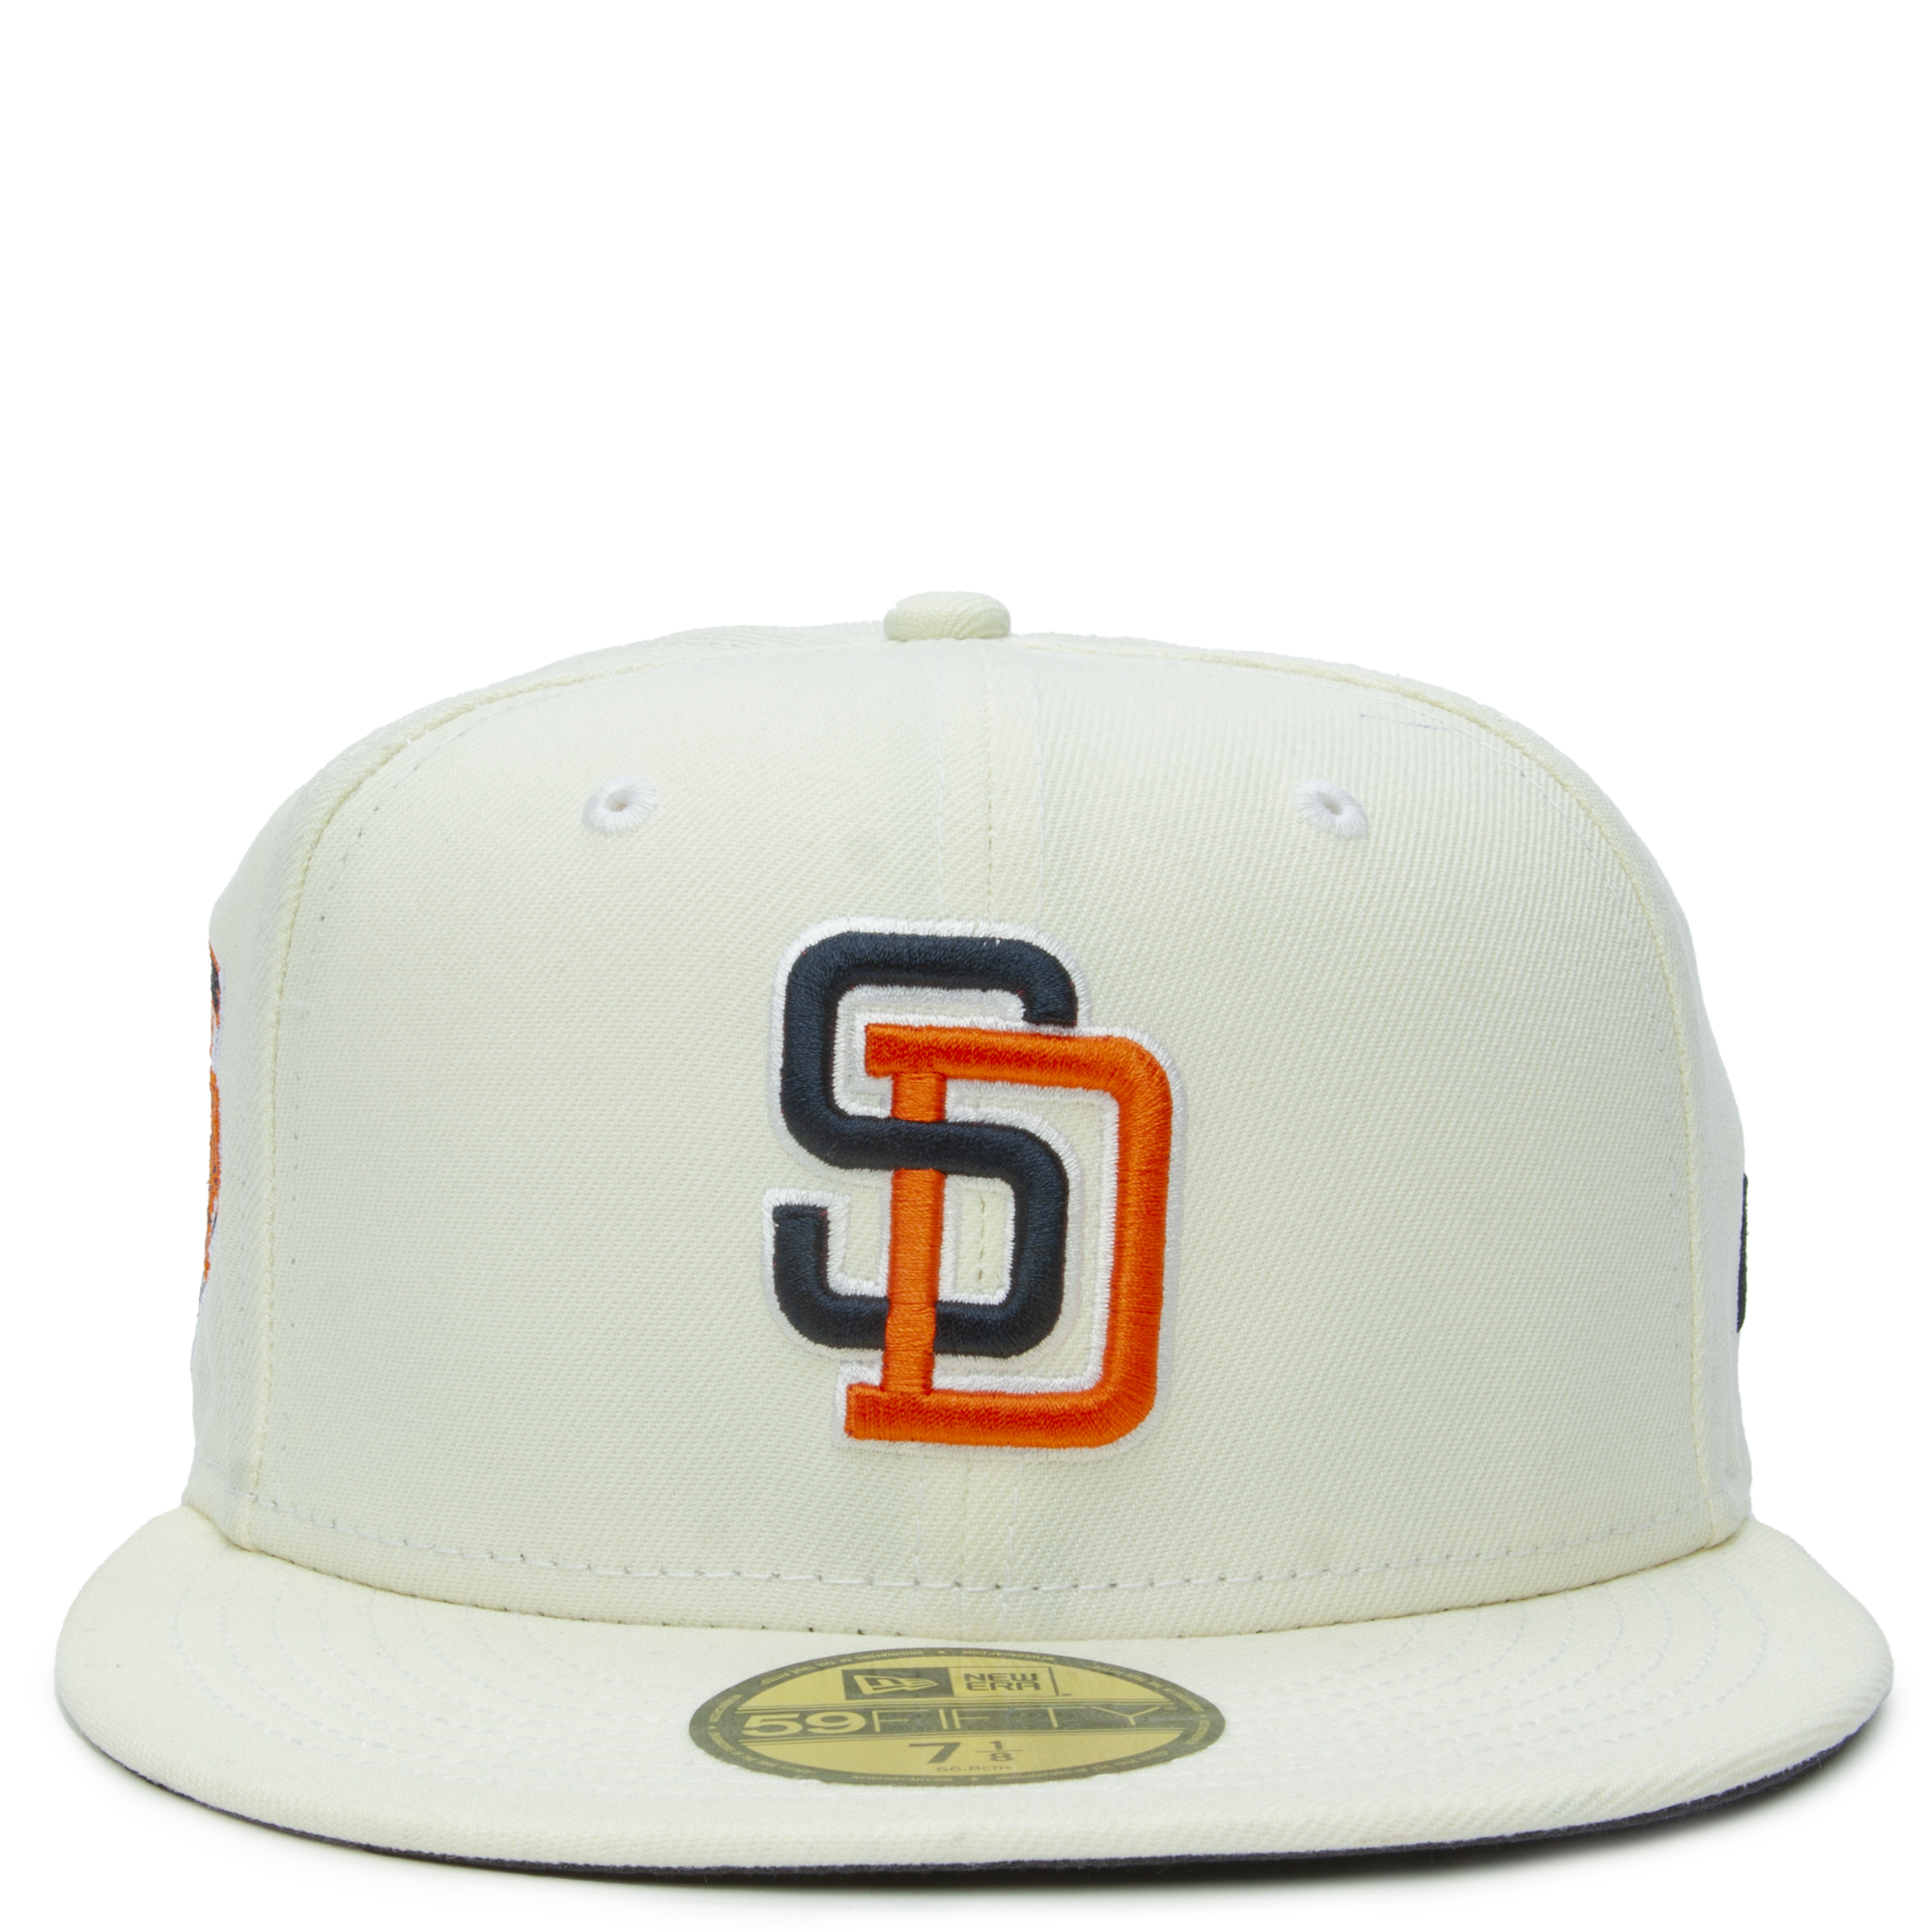 Men's New Era White/Brown San Diego Padres Cooperstown Collection